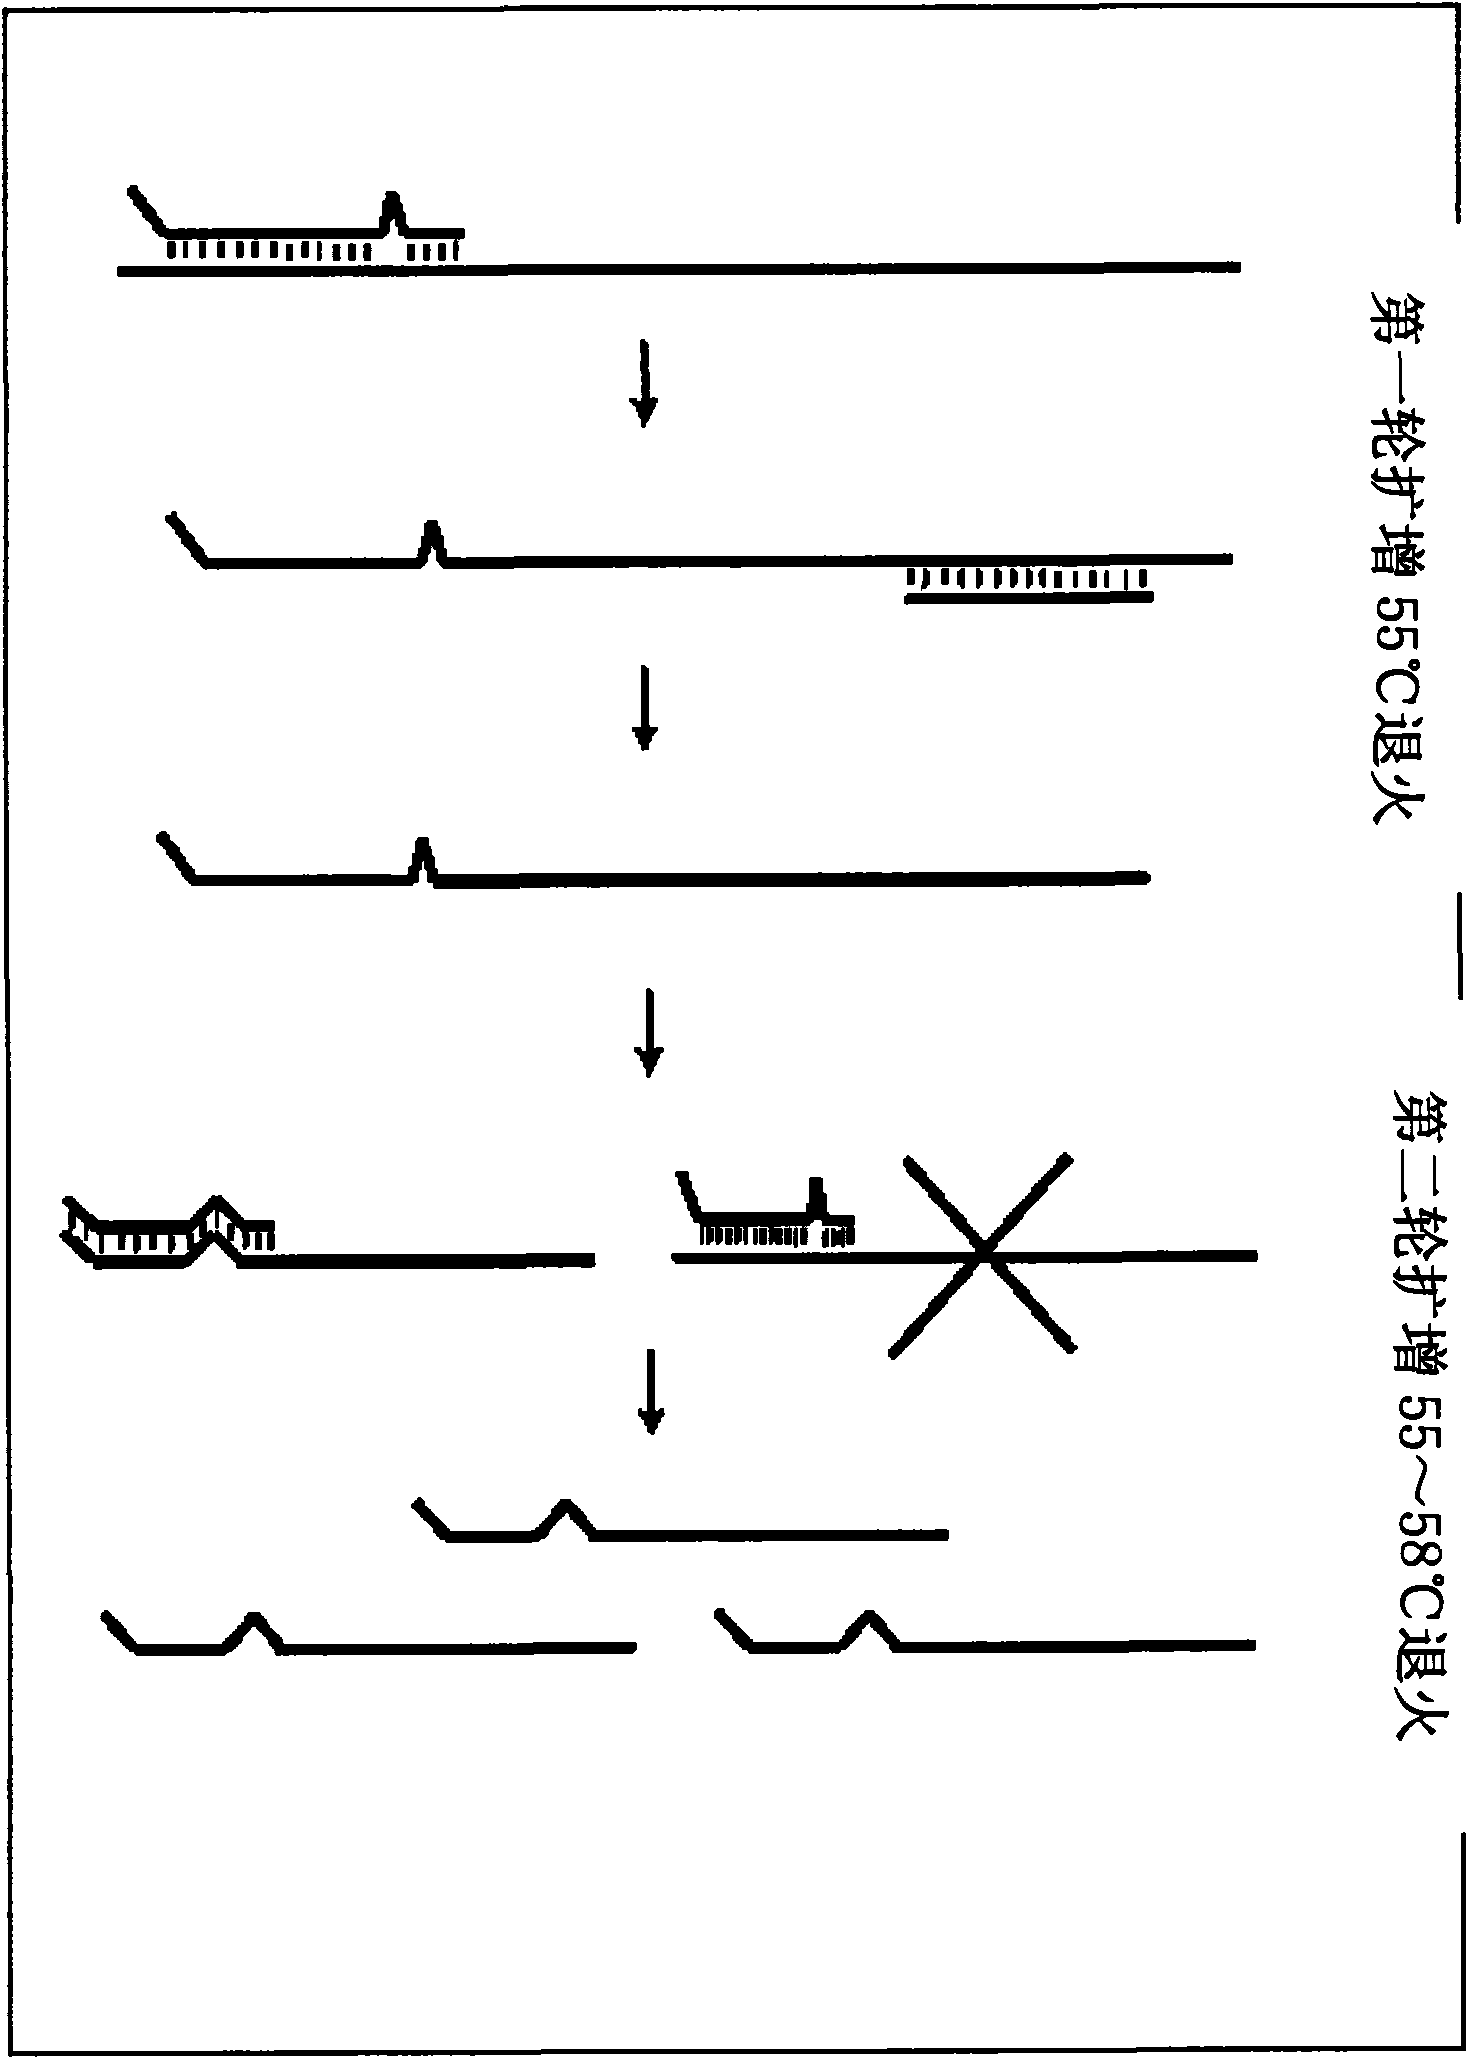 Primer design method for amplifying low-content gene mutation DNA and application thereof